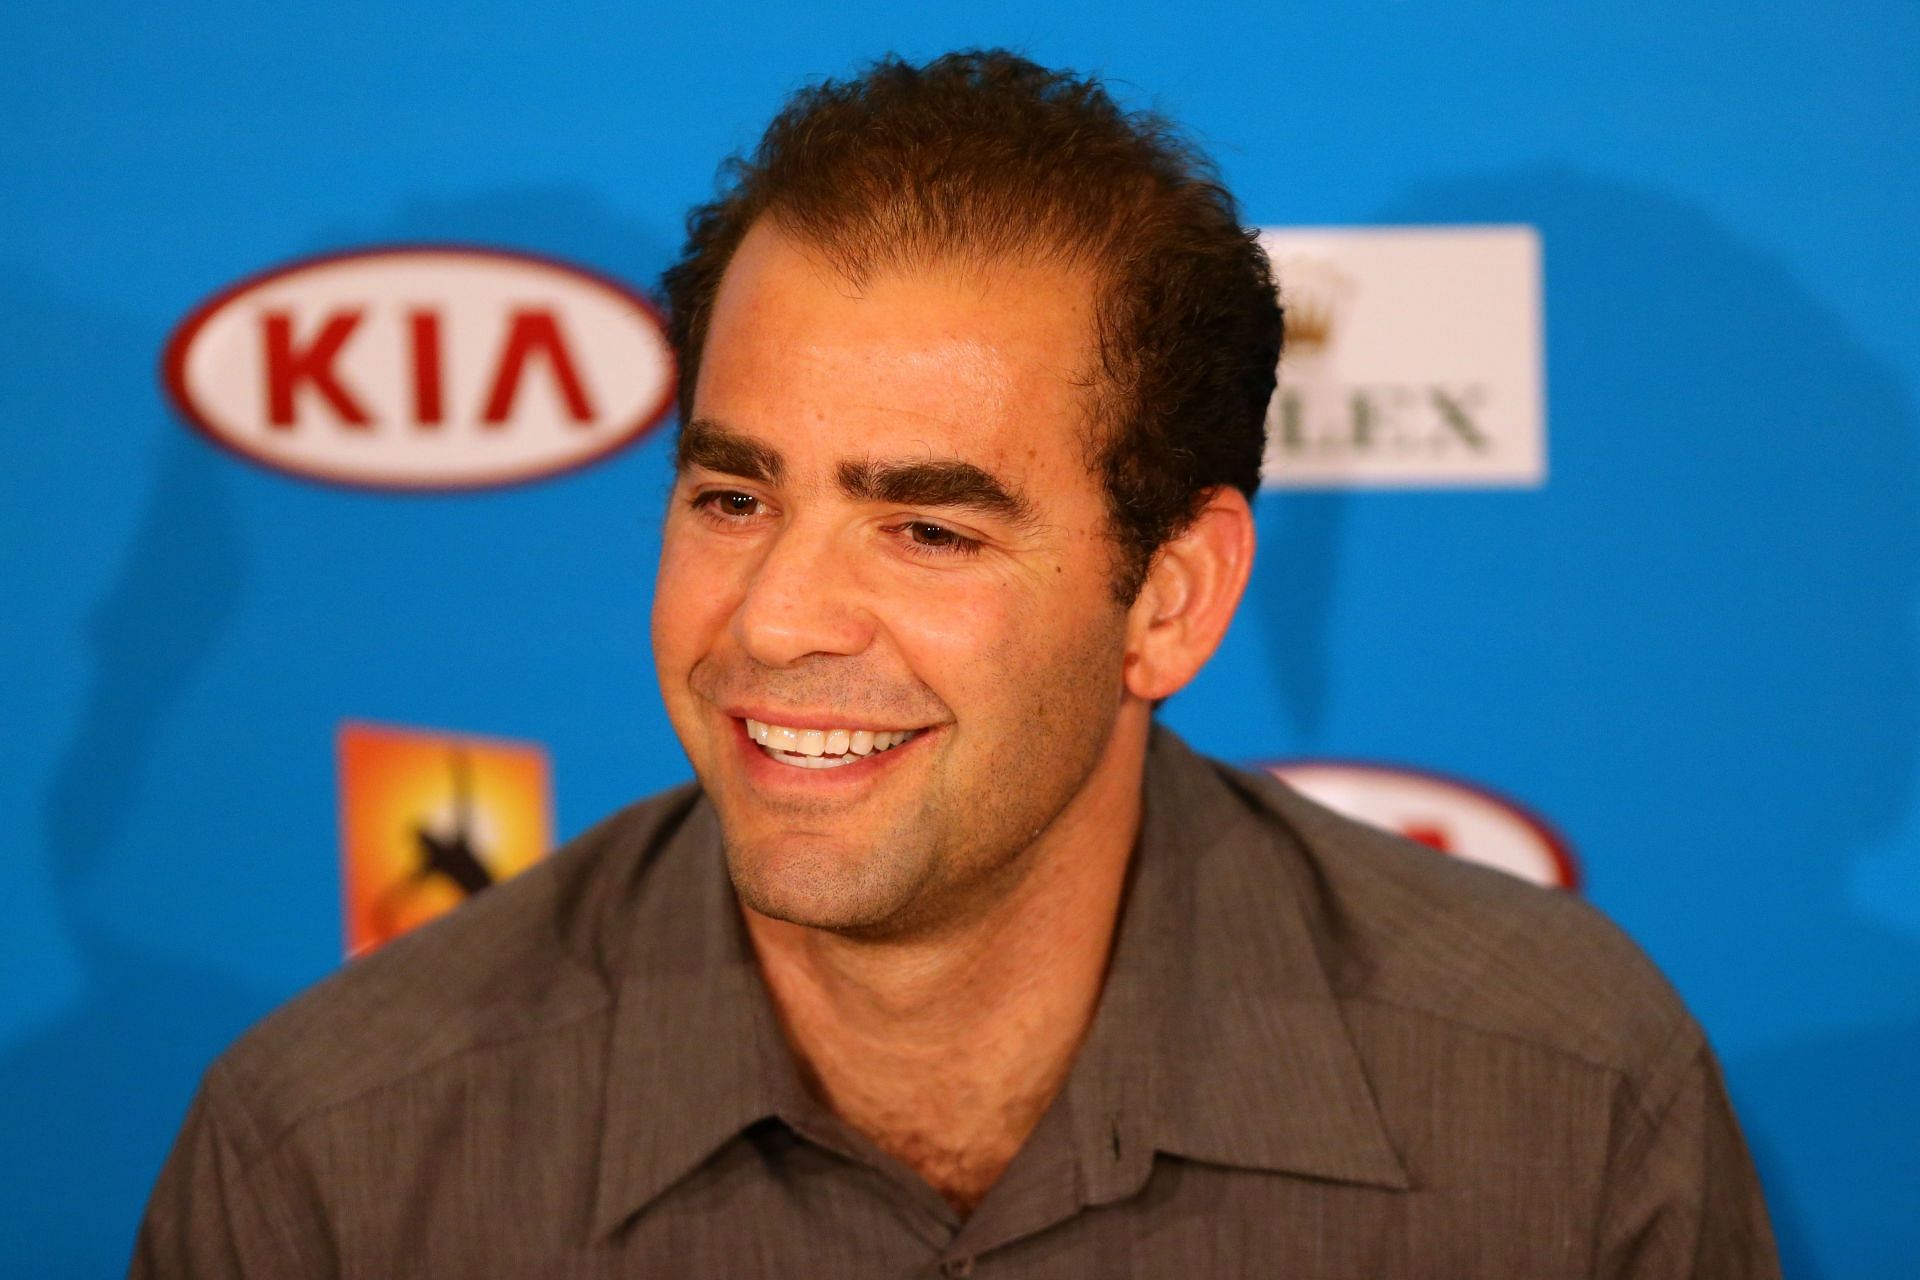 Pete Sampras pictured at the 2014 Australian Open 